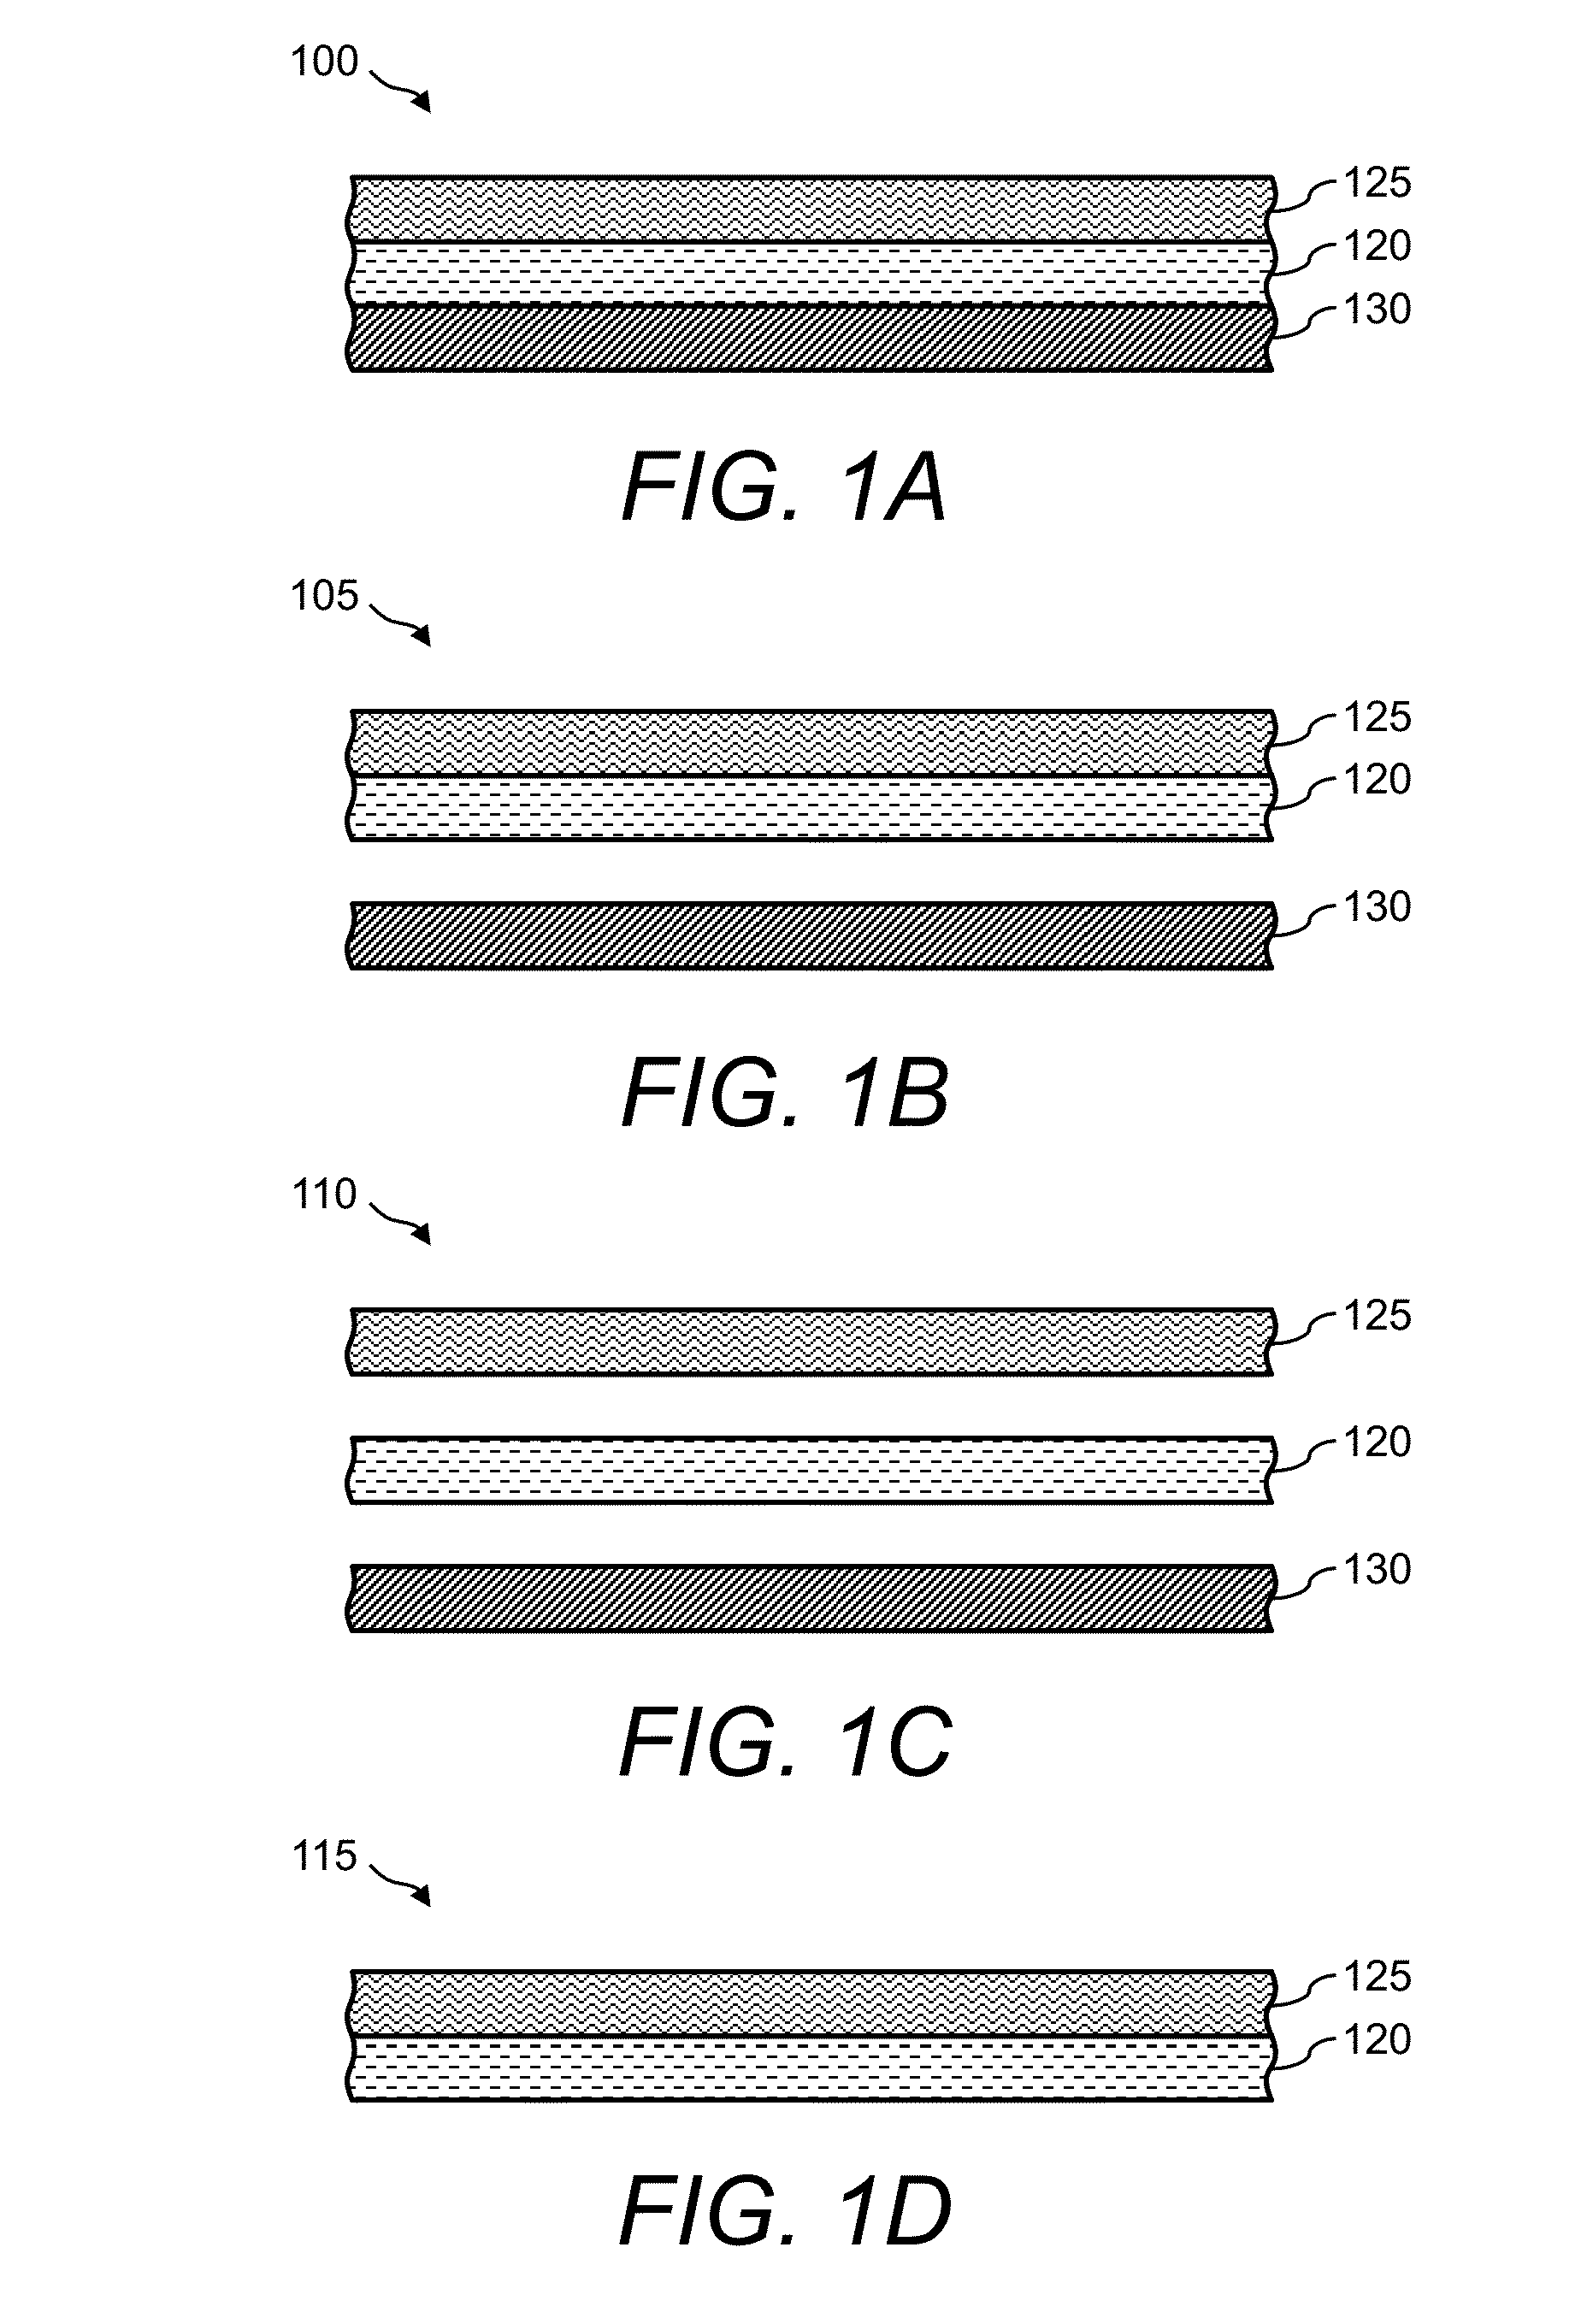 Material for Dissipating Heat From and/or Reducing Heat Signature of Electronic Devices and Clothing